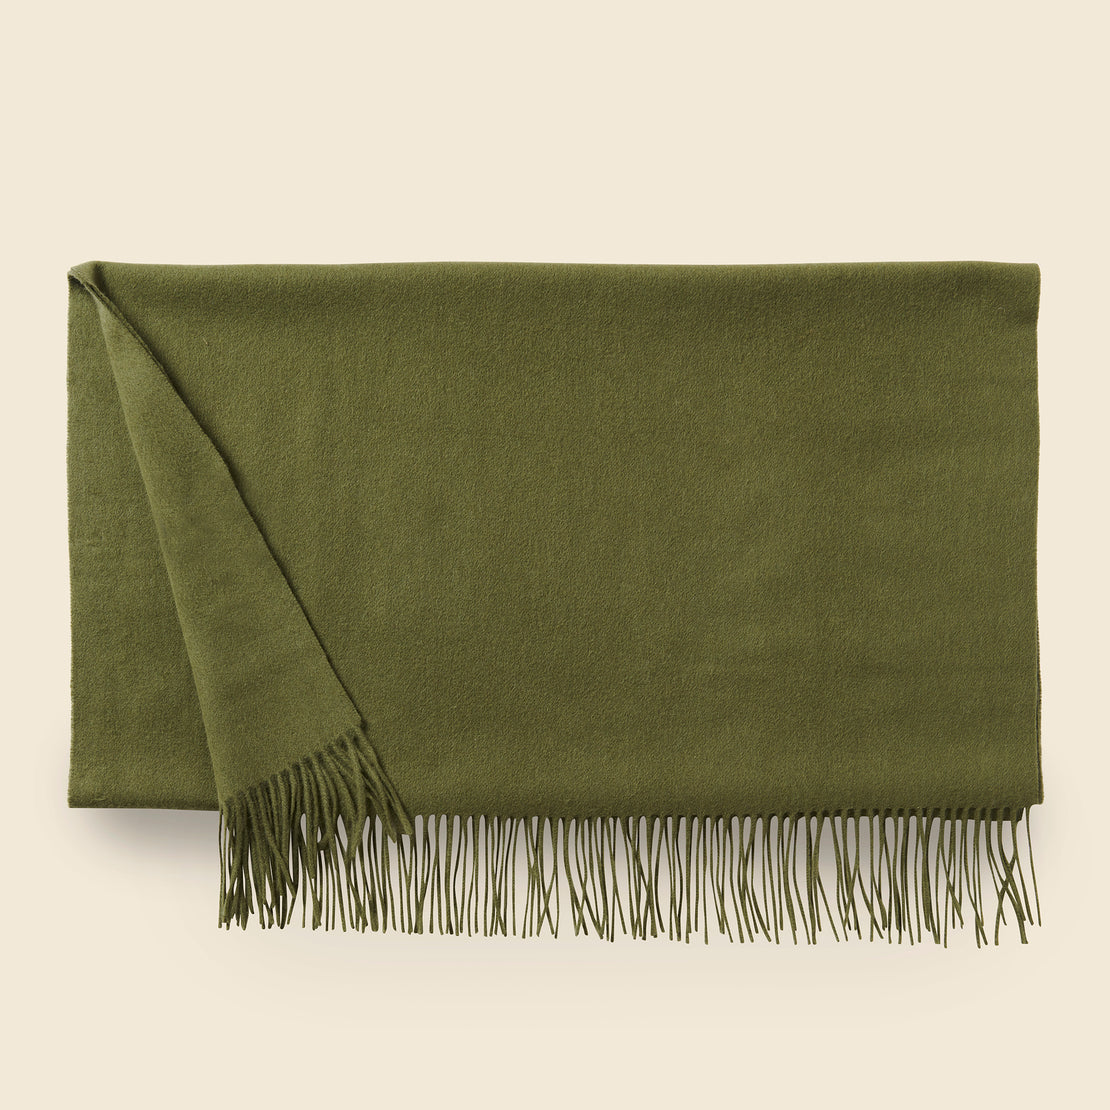 Lambswool Knee Blanket - Olive - Home - STAG Provisions - Home - Bed - Blanket